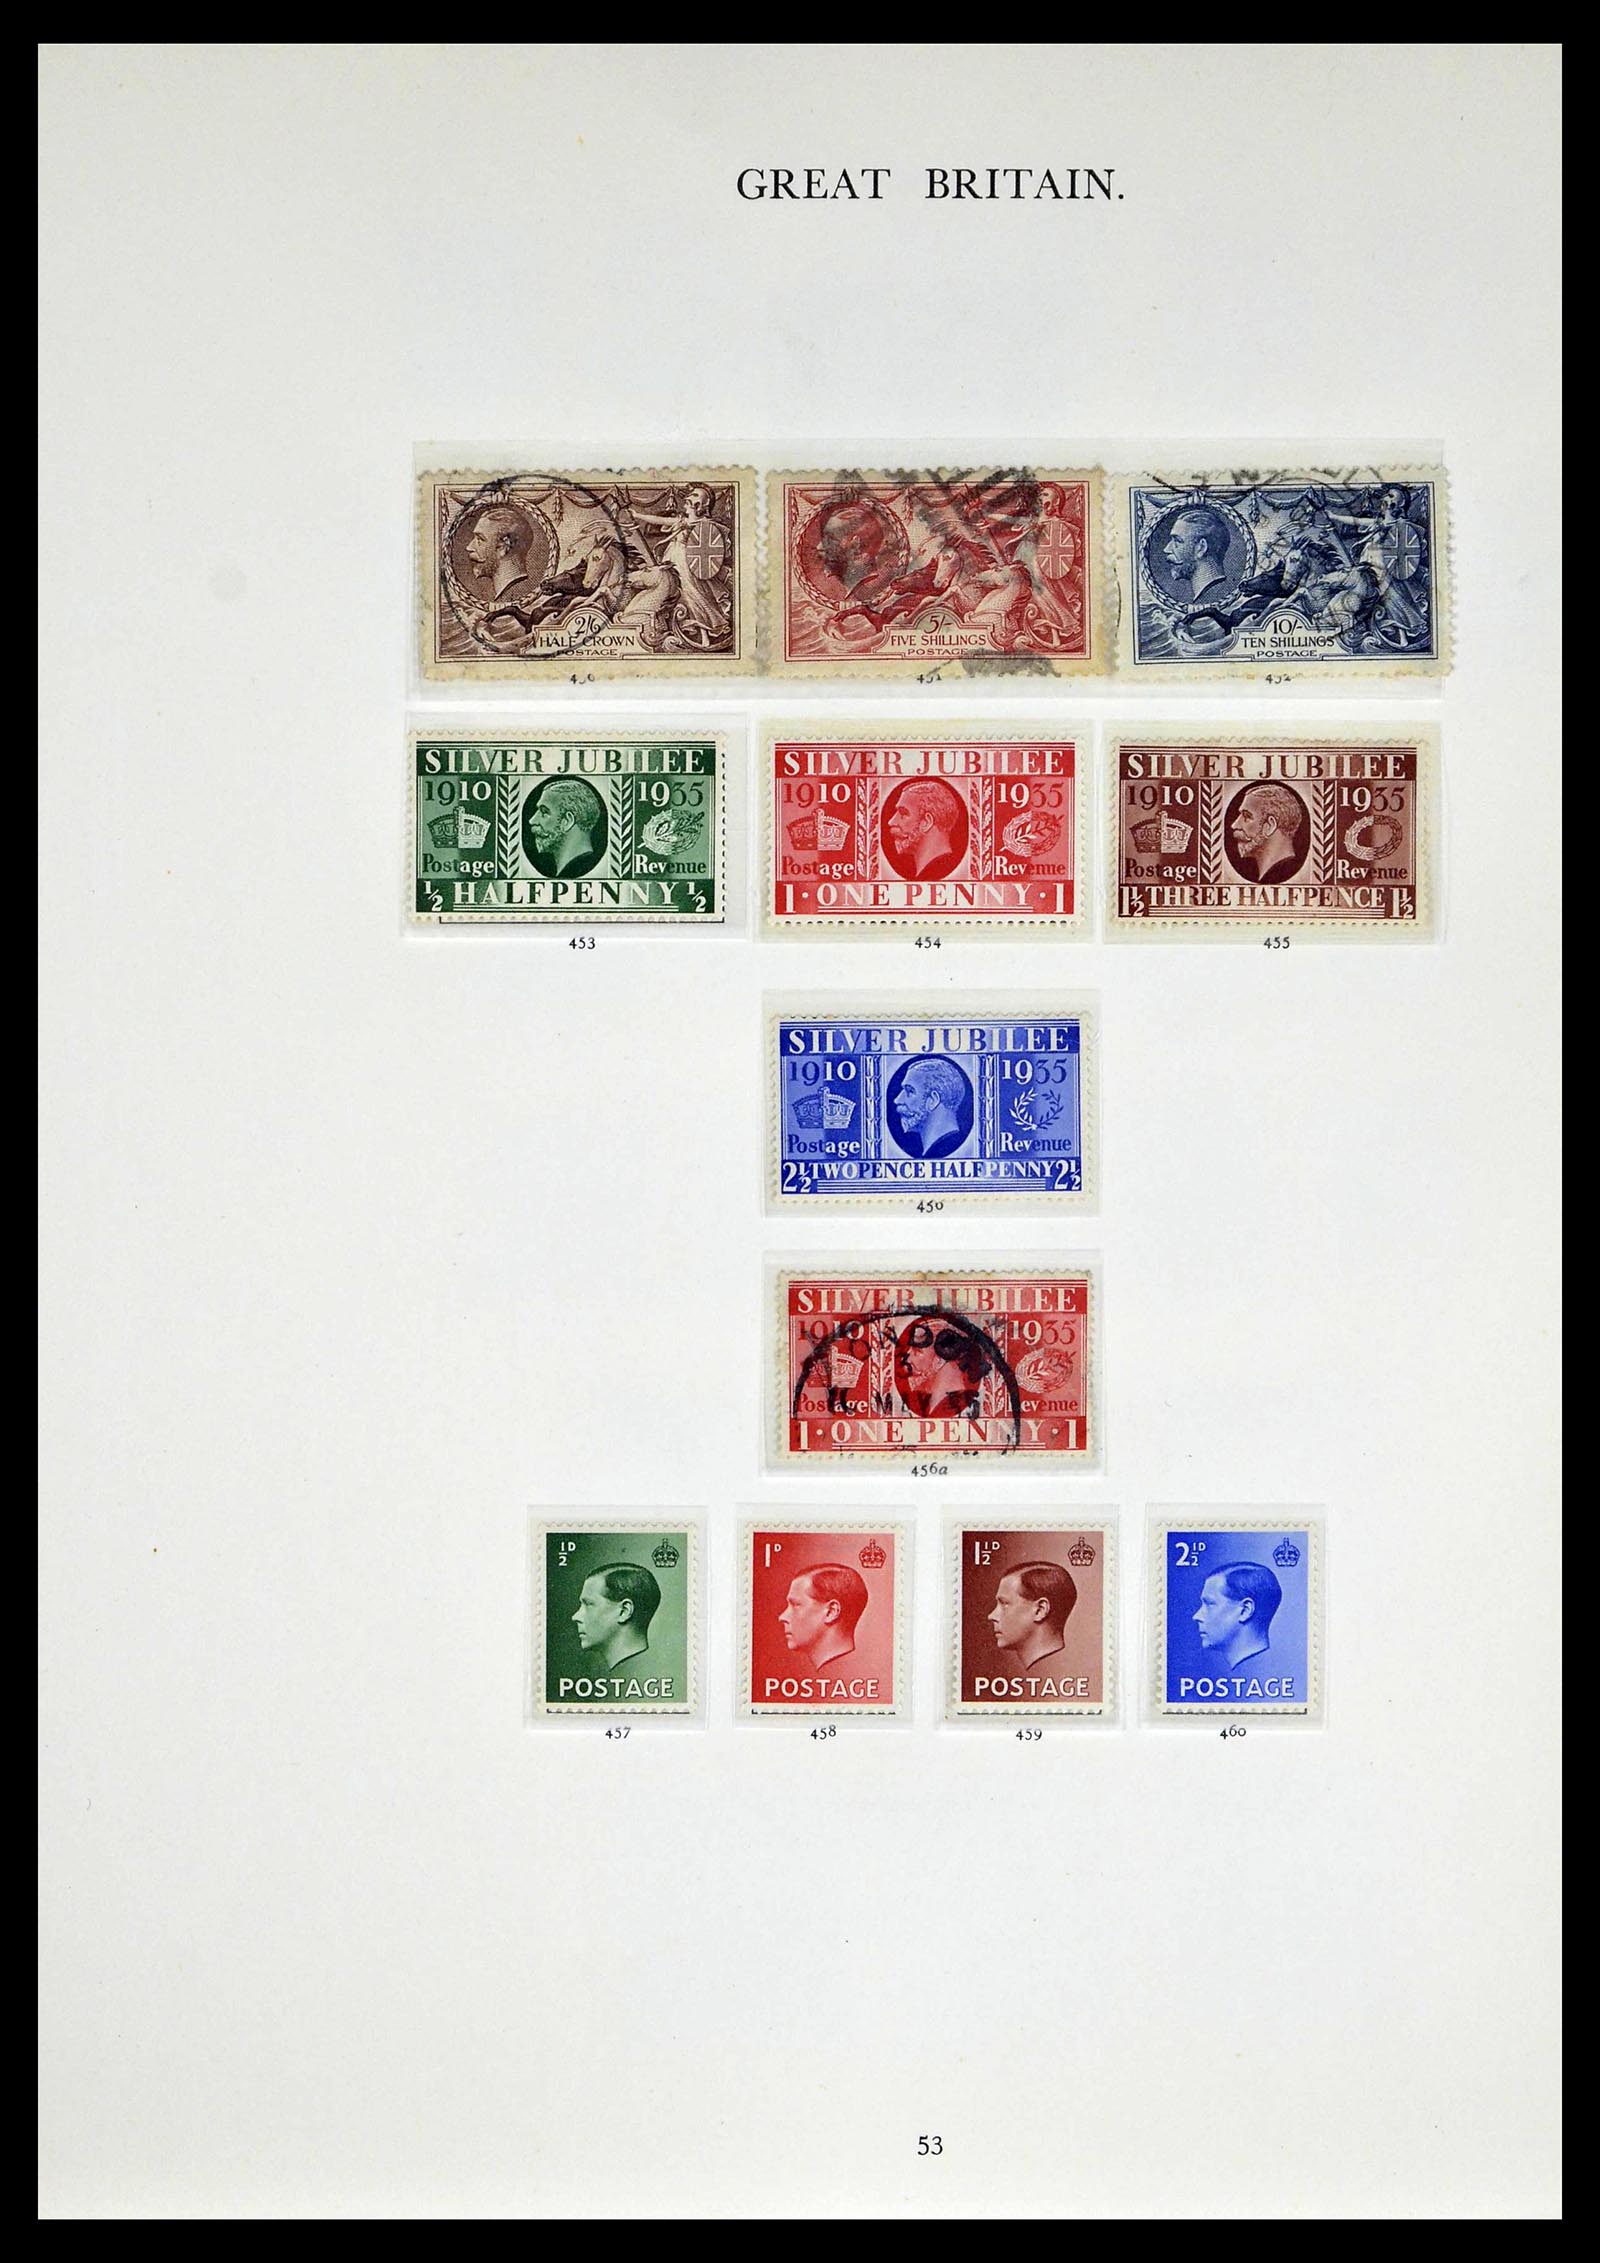 39025 0023 - Stamp collection 39025 Great Britain specialised 1840-1990.